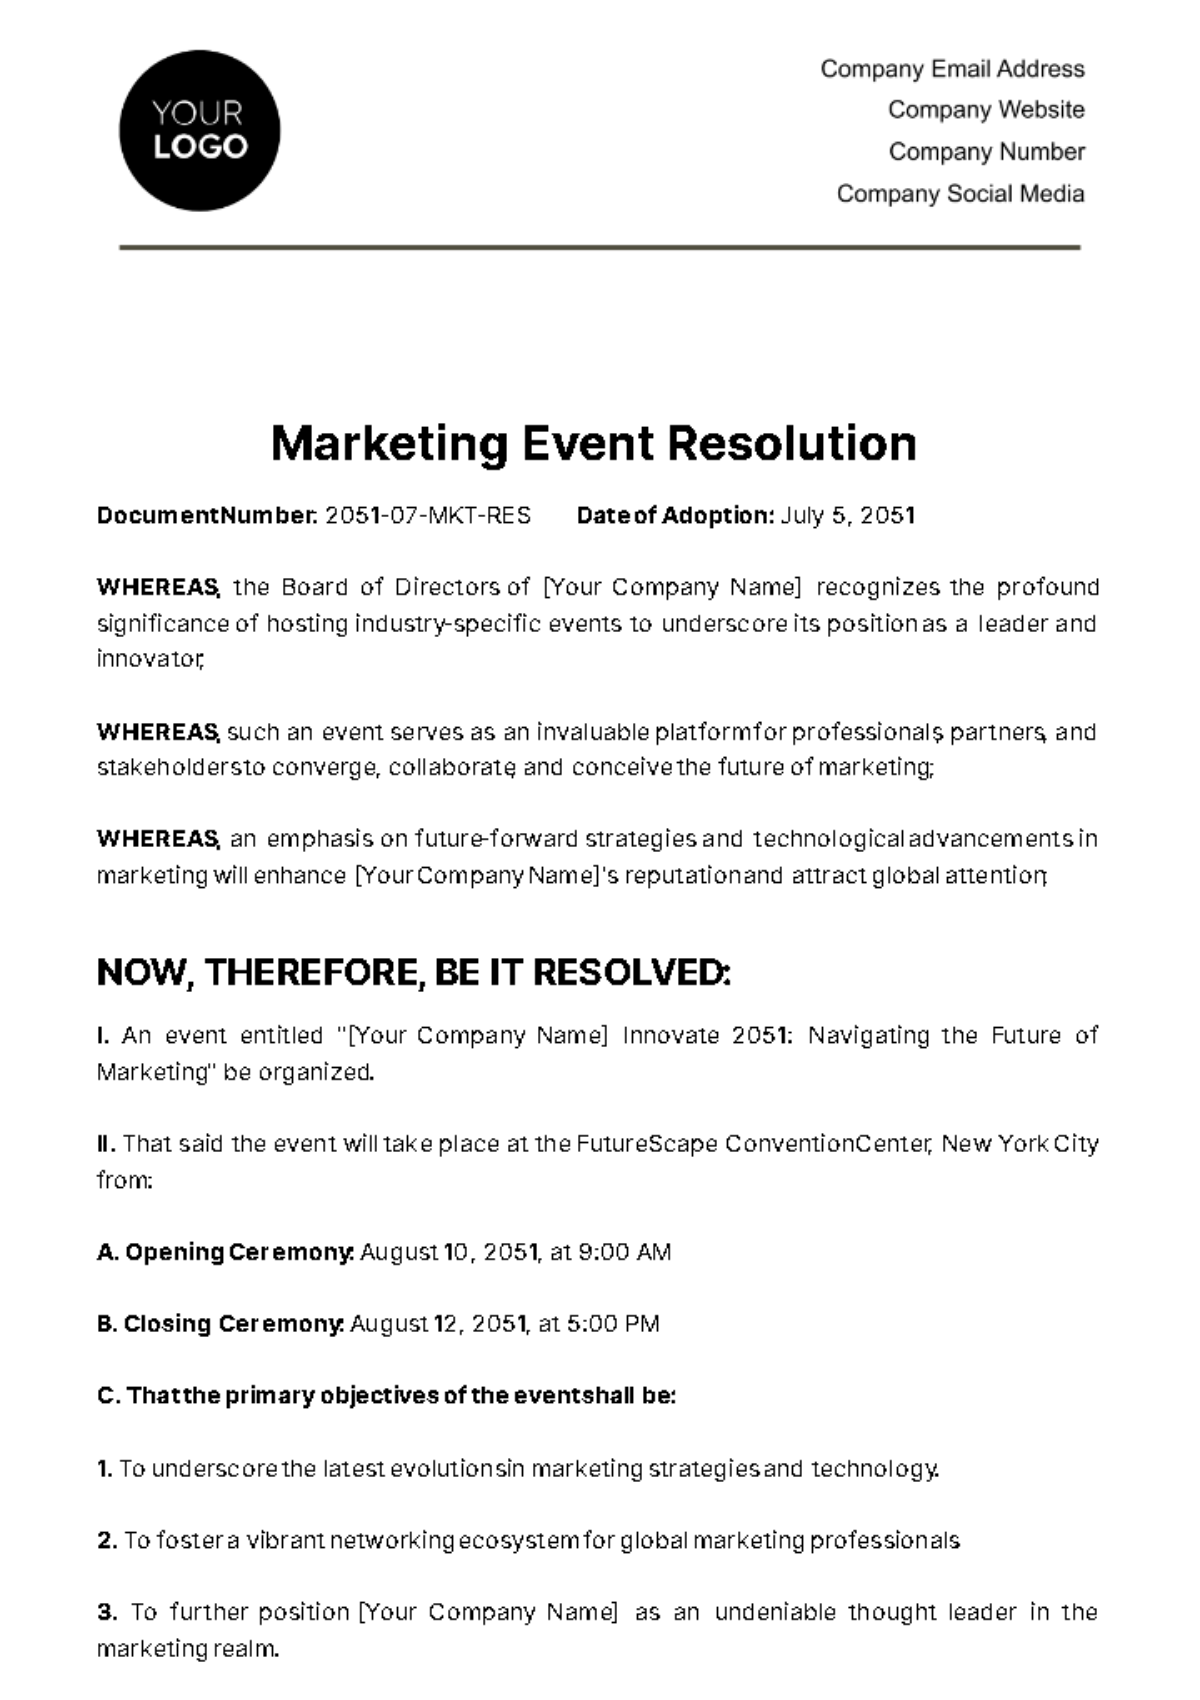 Free Marketing Event Resolution Template